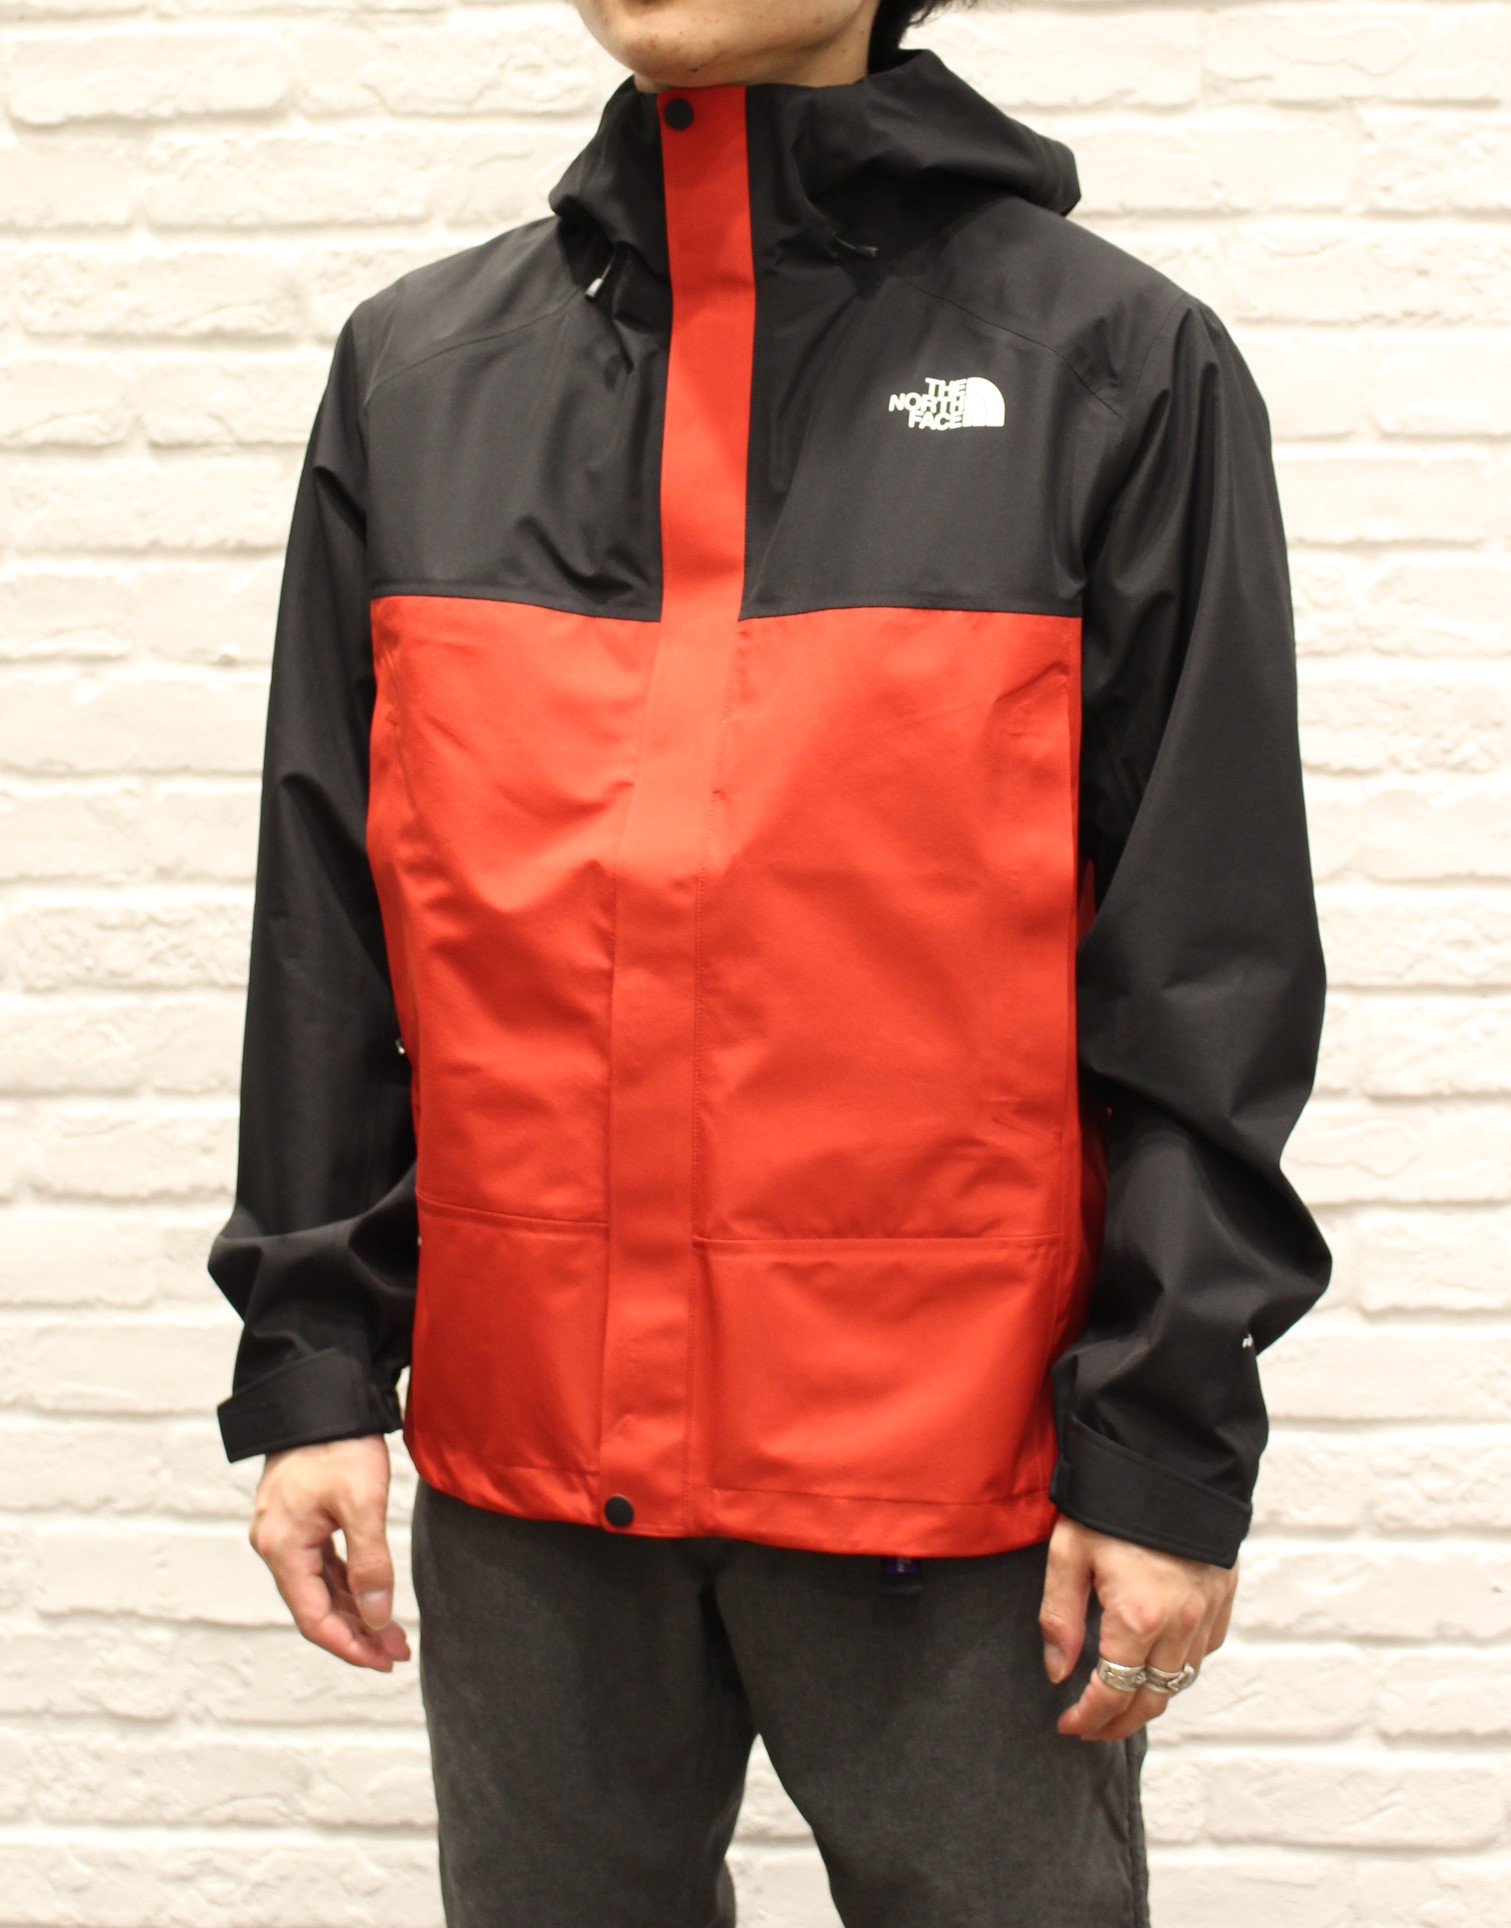 THE NORTH FACE / FUTURE LIGHT DRIZZLE JACKET